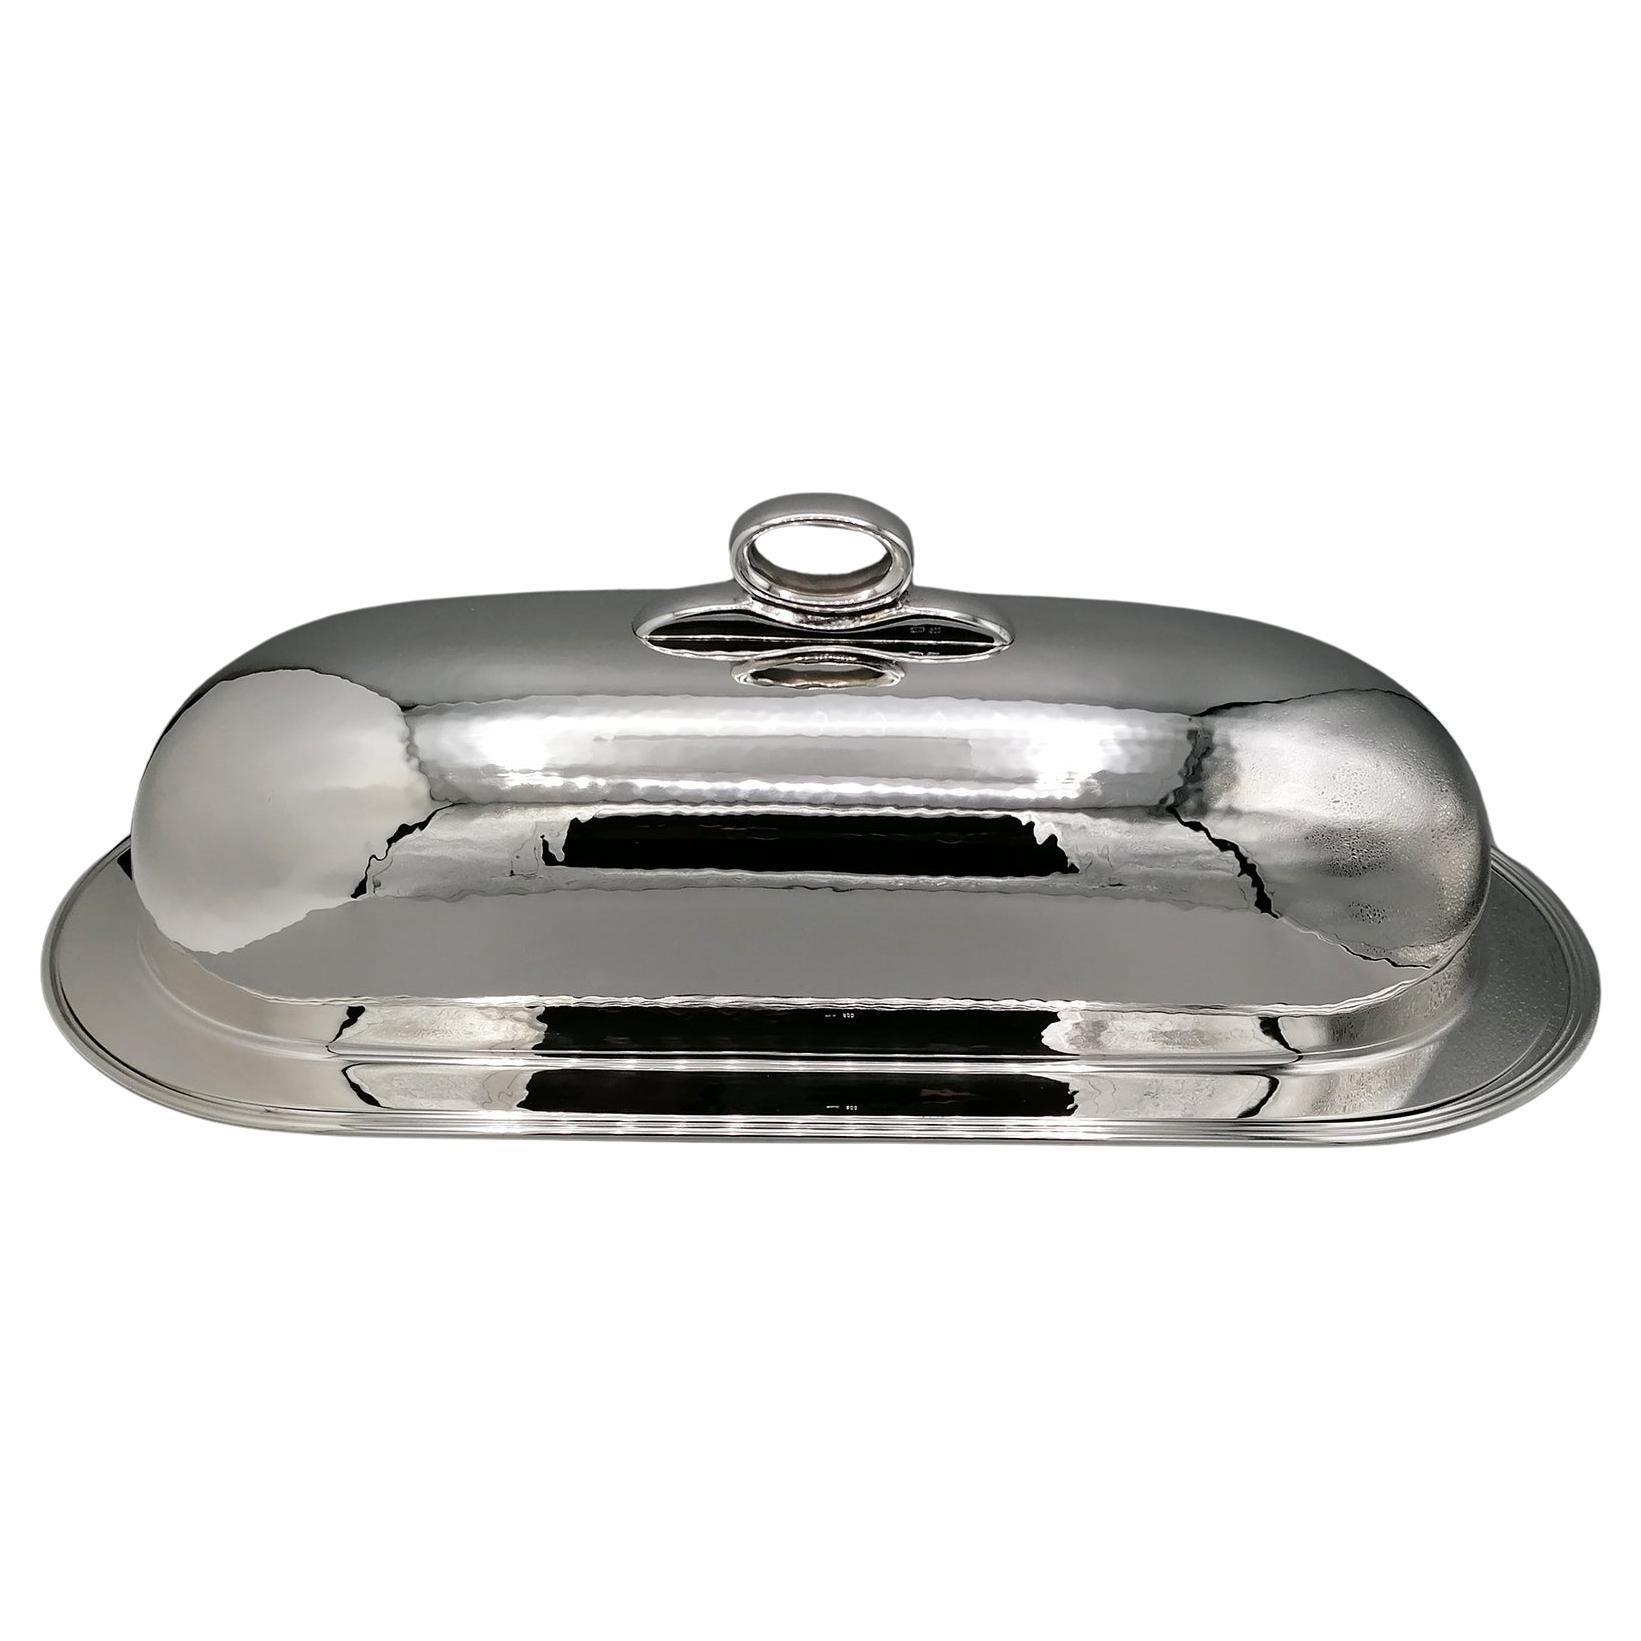 Italie Solid Silver 800 Meet dish with lid For Sale